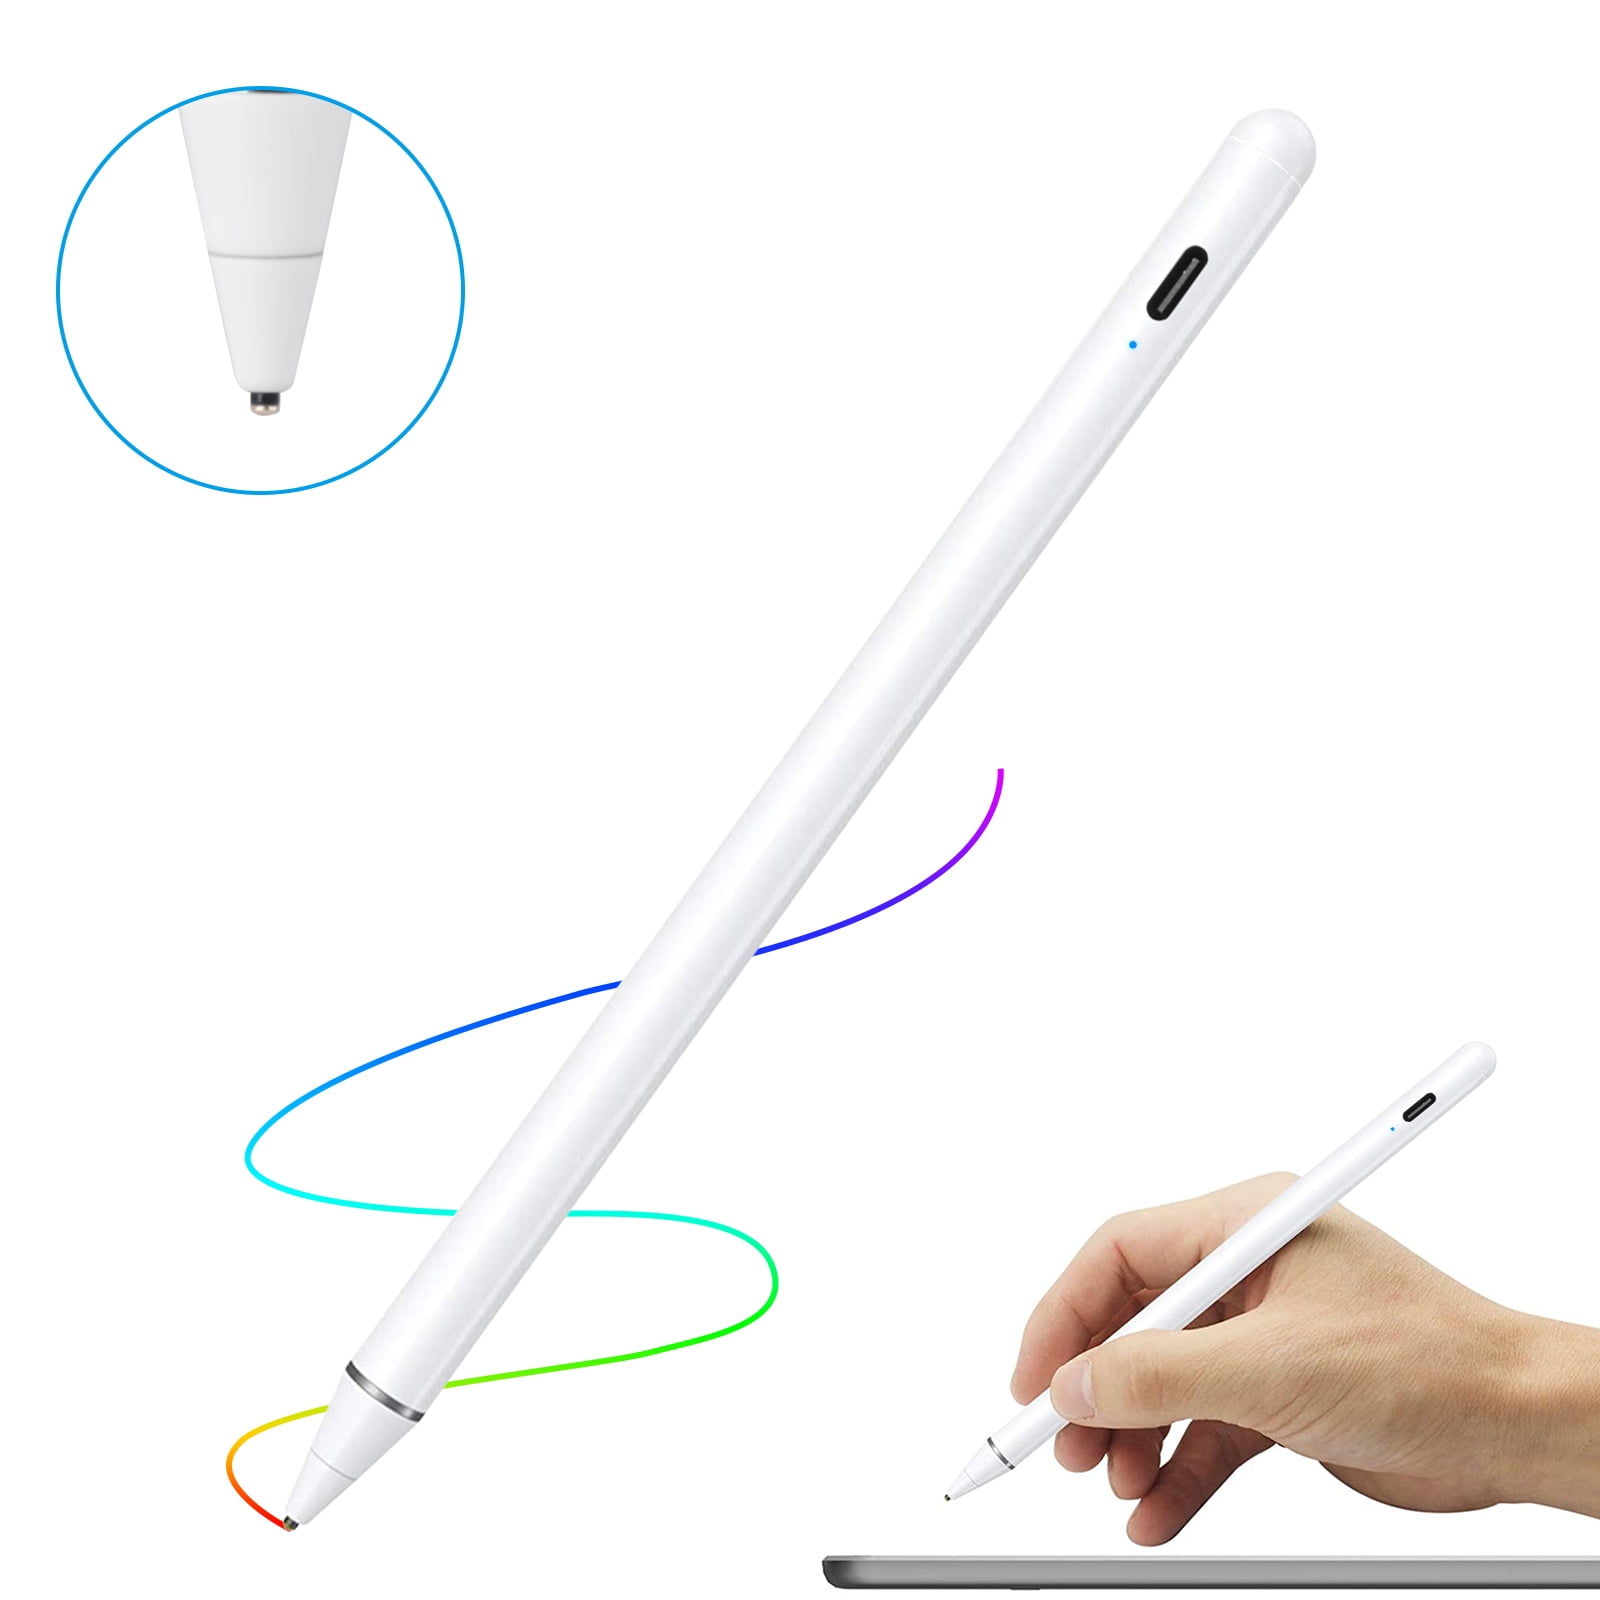 Stylus Pen, TSV Active Stylus Digital Pen 1.5mm Fine Tip Smart Pen  Rechargeable Drawing Stylus Compatible with iPad, iPhone, Samsung, Android,  Smartphone, Other Touchscreen Devices 